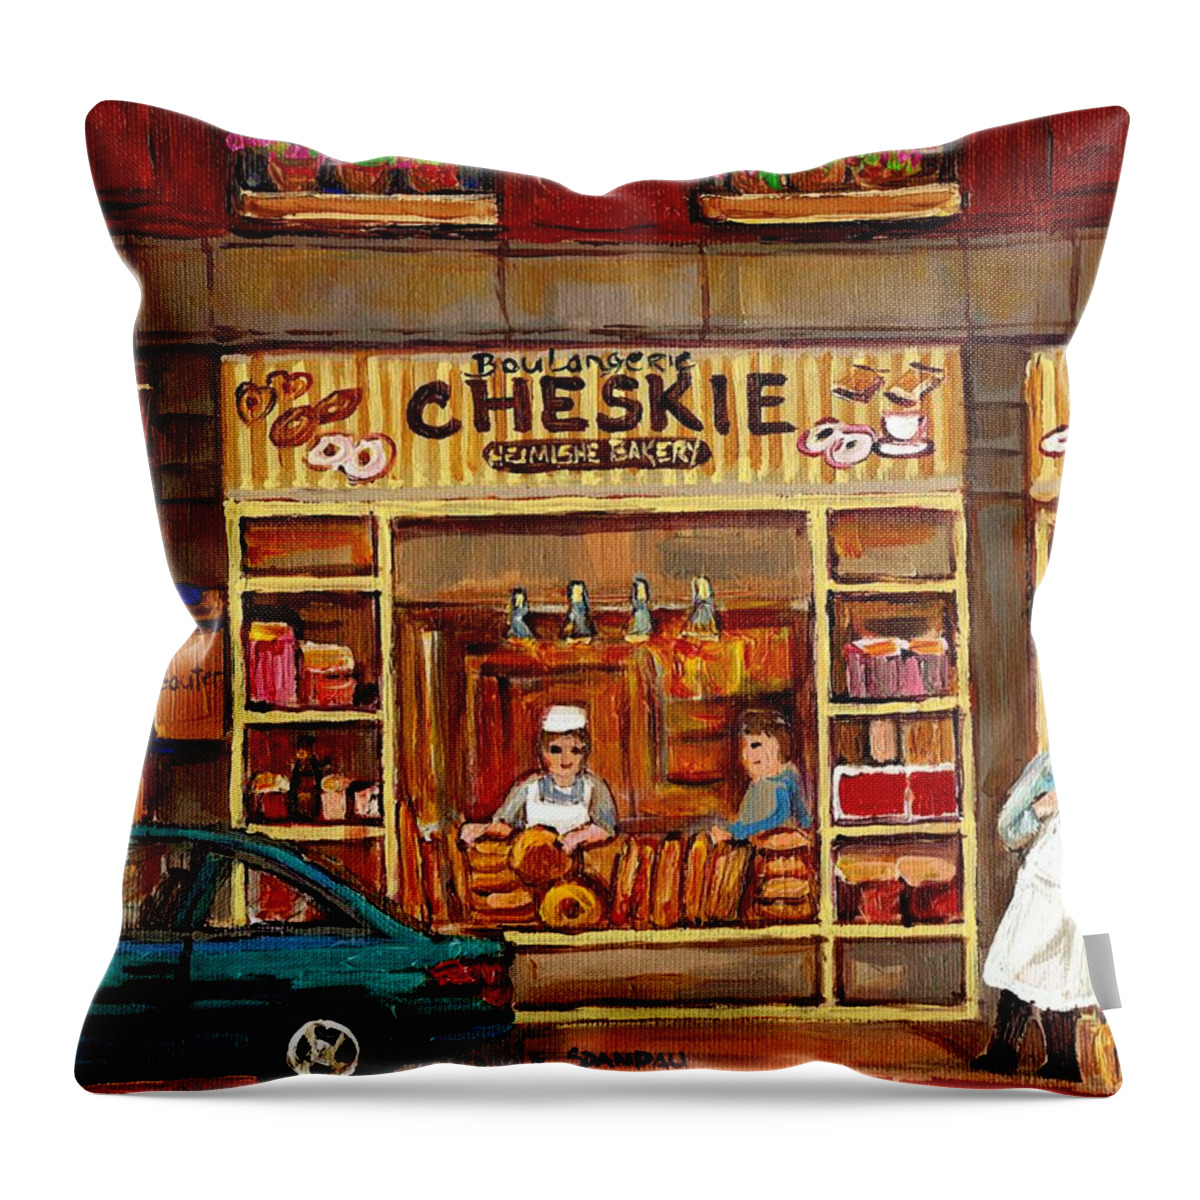 Montreal Throw Pillow featuring the painting Cheskies Hamishe Bakery by Carole Spandau